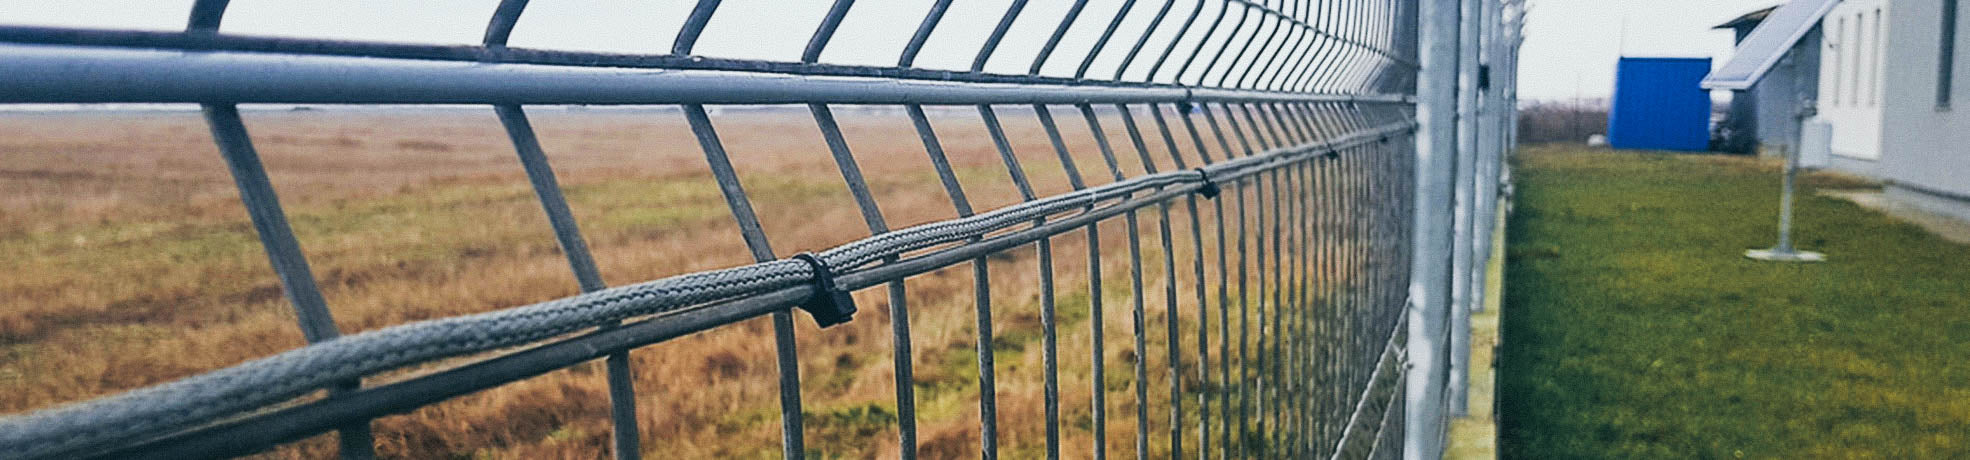 Fences and Gates | All Security Equipment